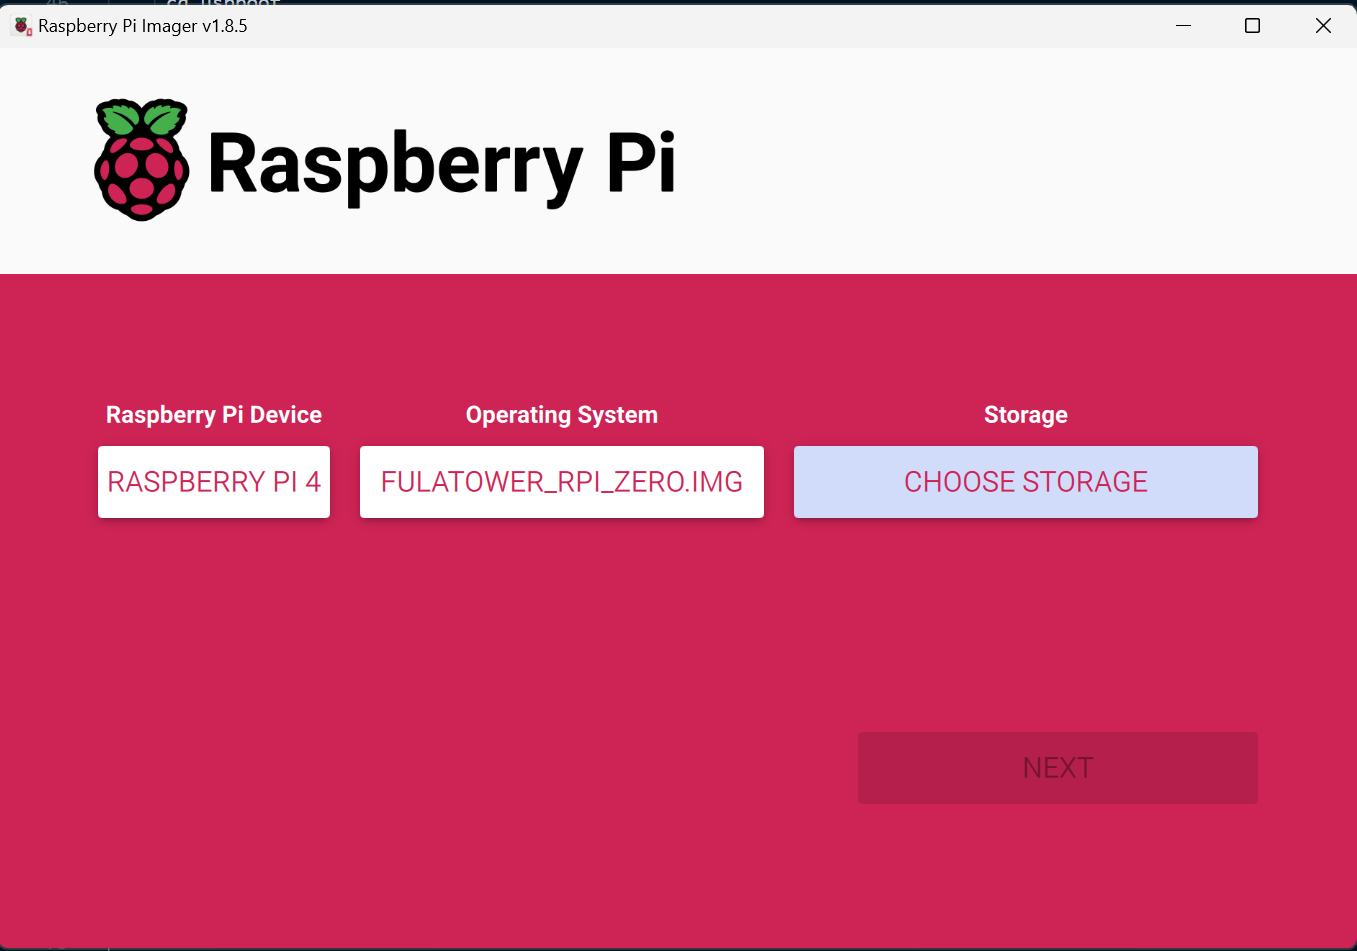 Placeholder for Raspberry Pi Imager configuration image